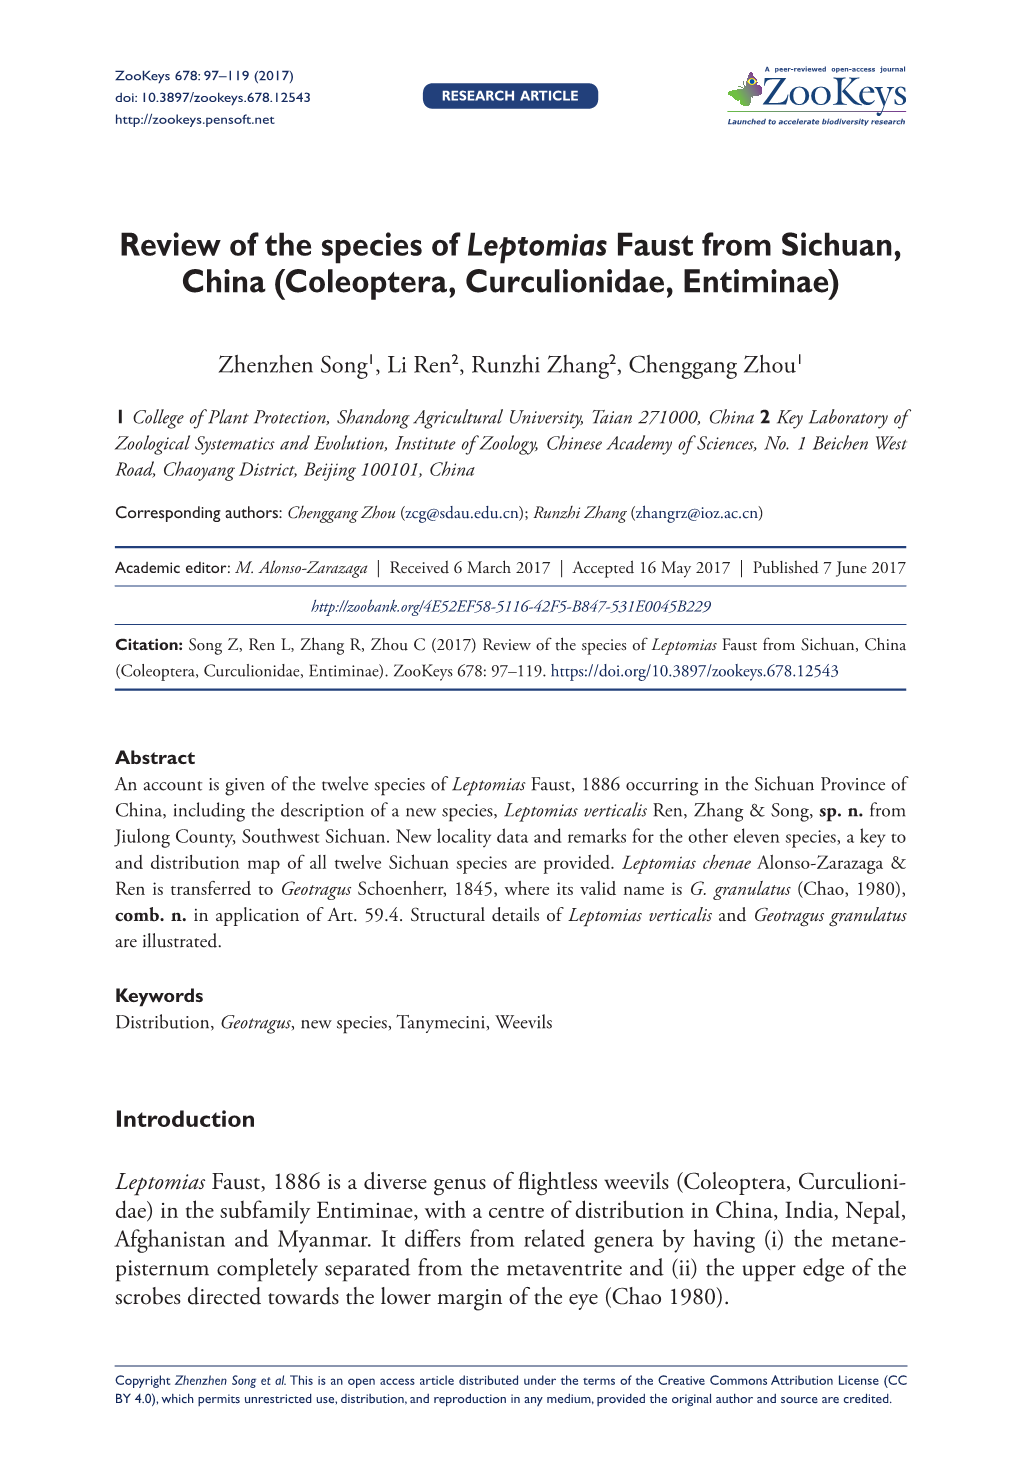 ﻿﻿﻿﻿Review of ﻿﻿The Species of Leptomias Faust from ﻿﻿Sichuan, China